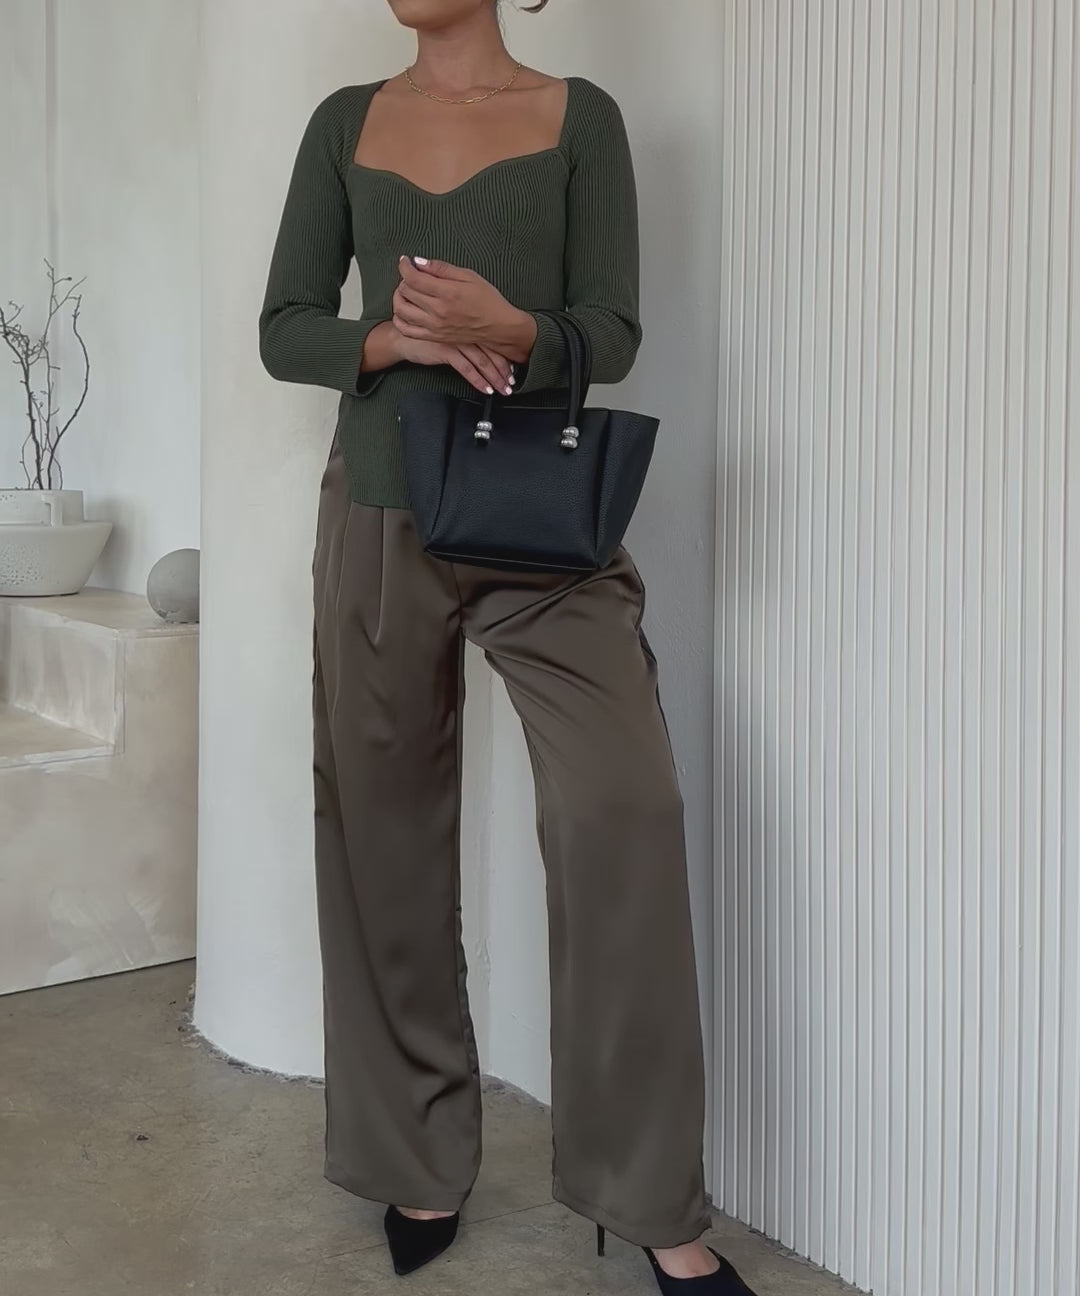 Video of a model wearing a recycled vegan leather top handle bag against a white wall. 